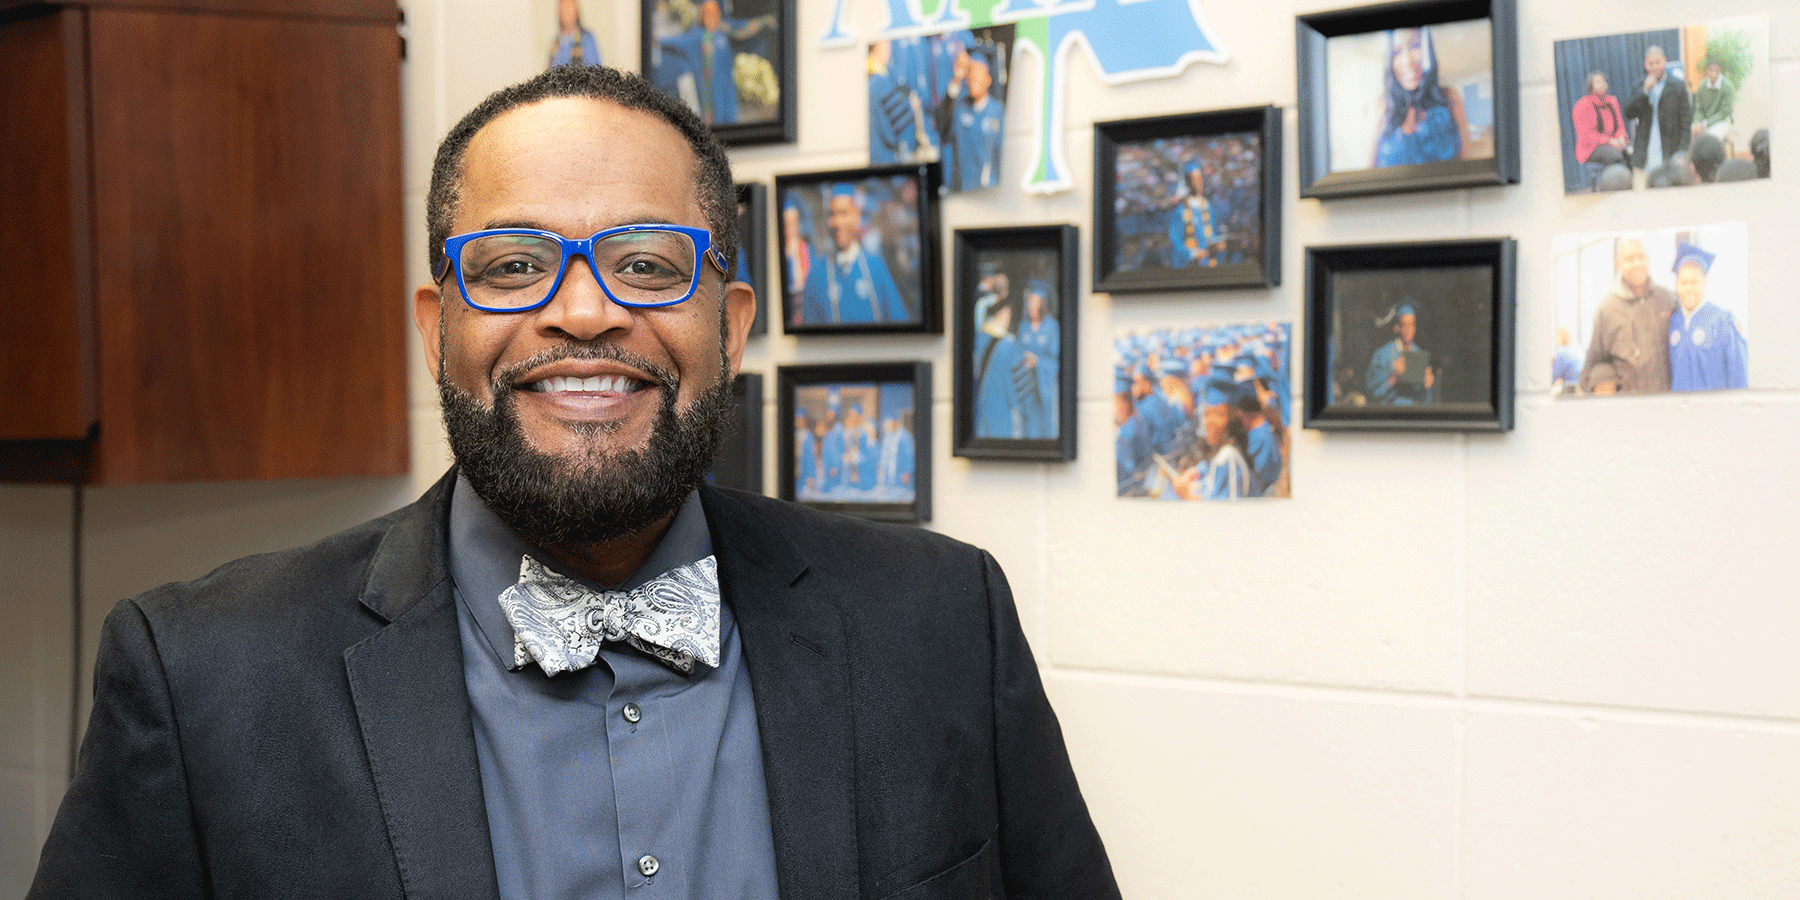 Black male with glasses and a suit posing in front of an office wall with pictures from a commencement ceremony with various students in caps and gowns in the background.